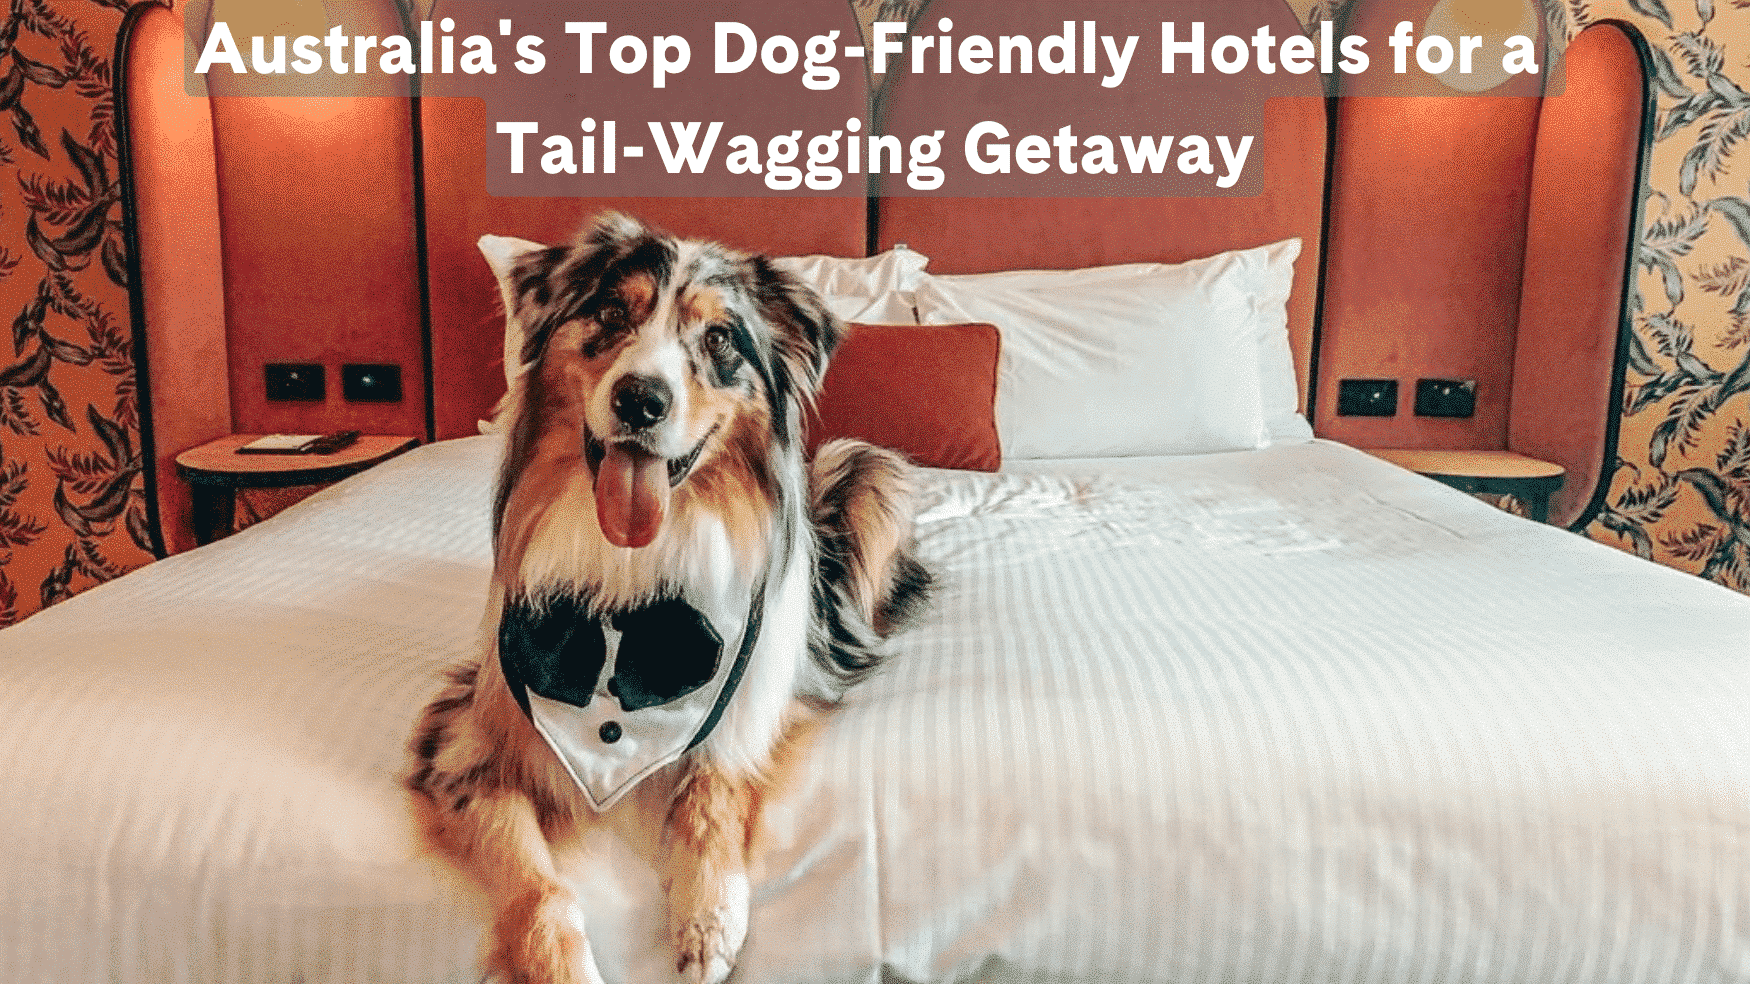 Australia's Top Dog-Friendly Hotels for a Tail-Wagging Getaway